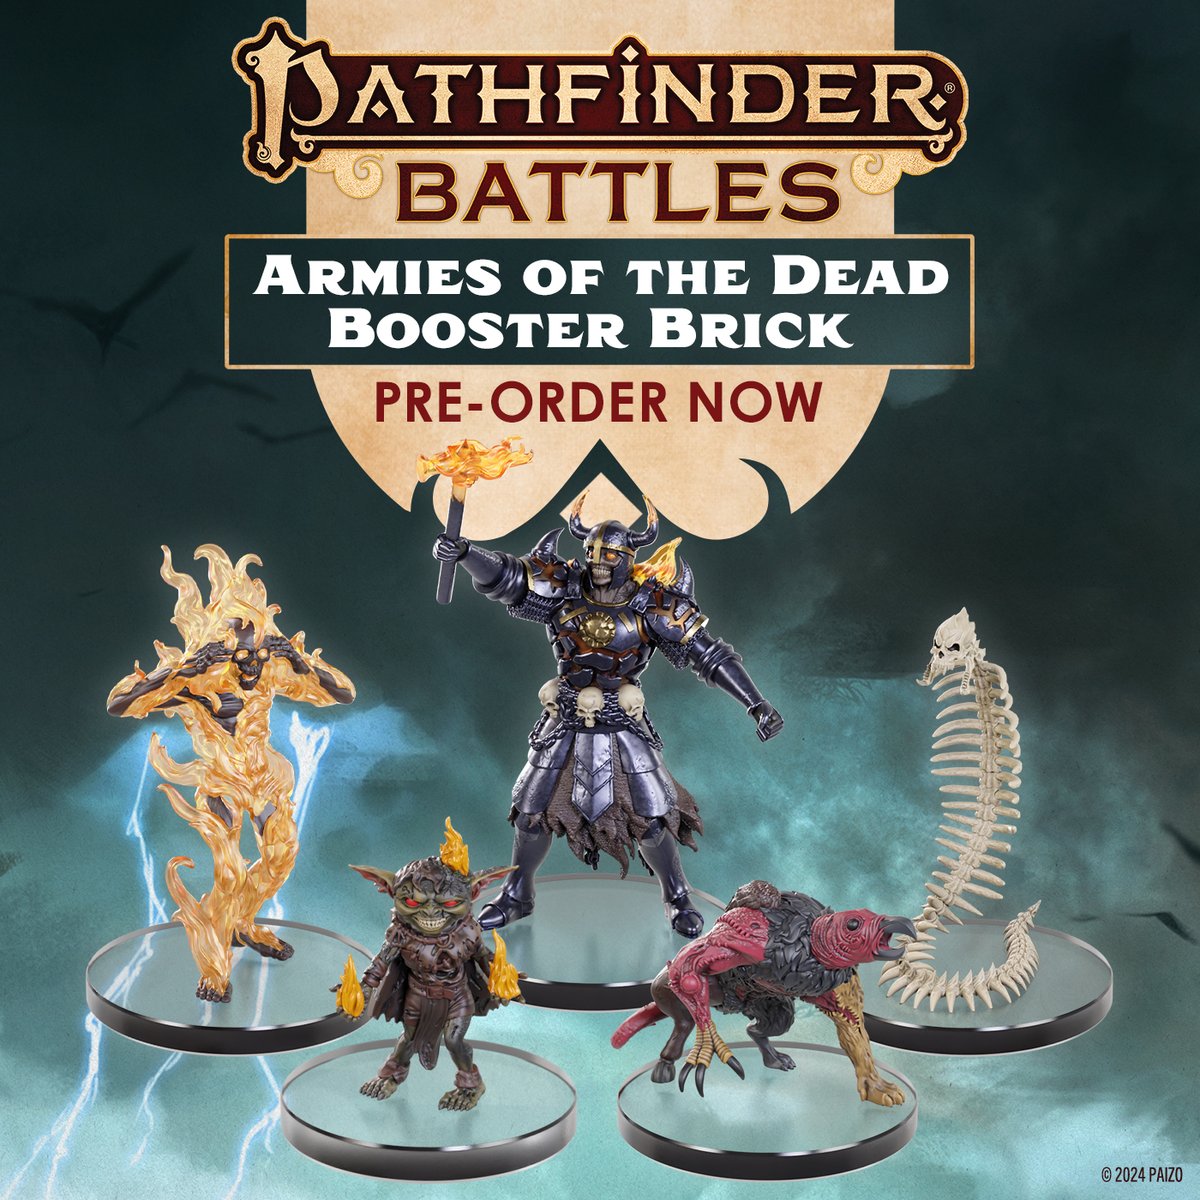 Necrohulks are the terrifying marriage of alchemy and necromancy. The necrohulks' bodies sustain alchemical mutations even through death. 💀Collect these and 44 other undead minis in #Pathfinder Armies of the Dead! Preorder today at your FLGS or wizkids.io/ArmiesOfTheDead!